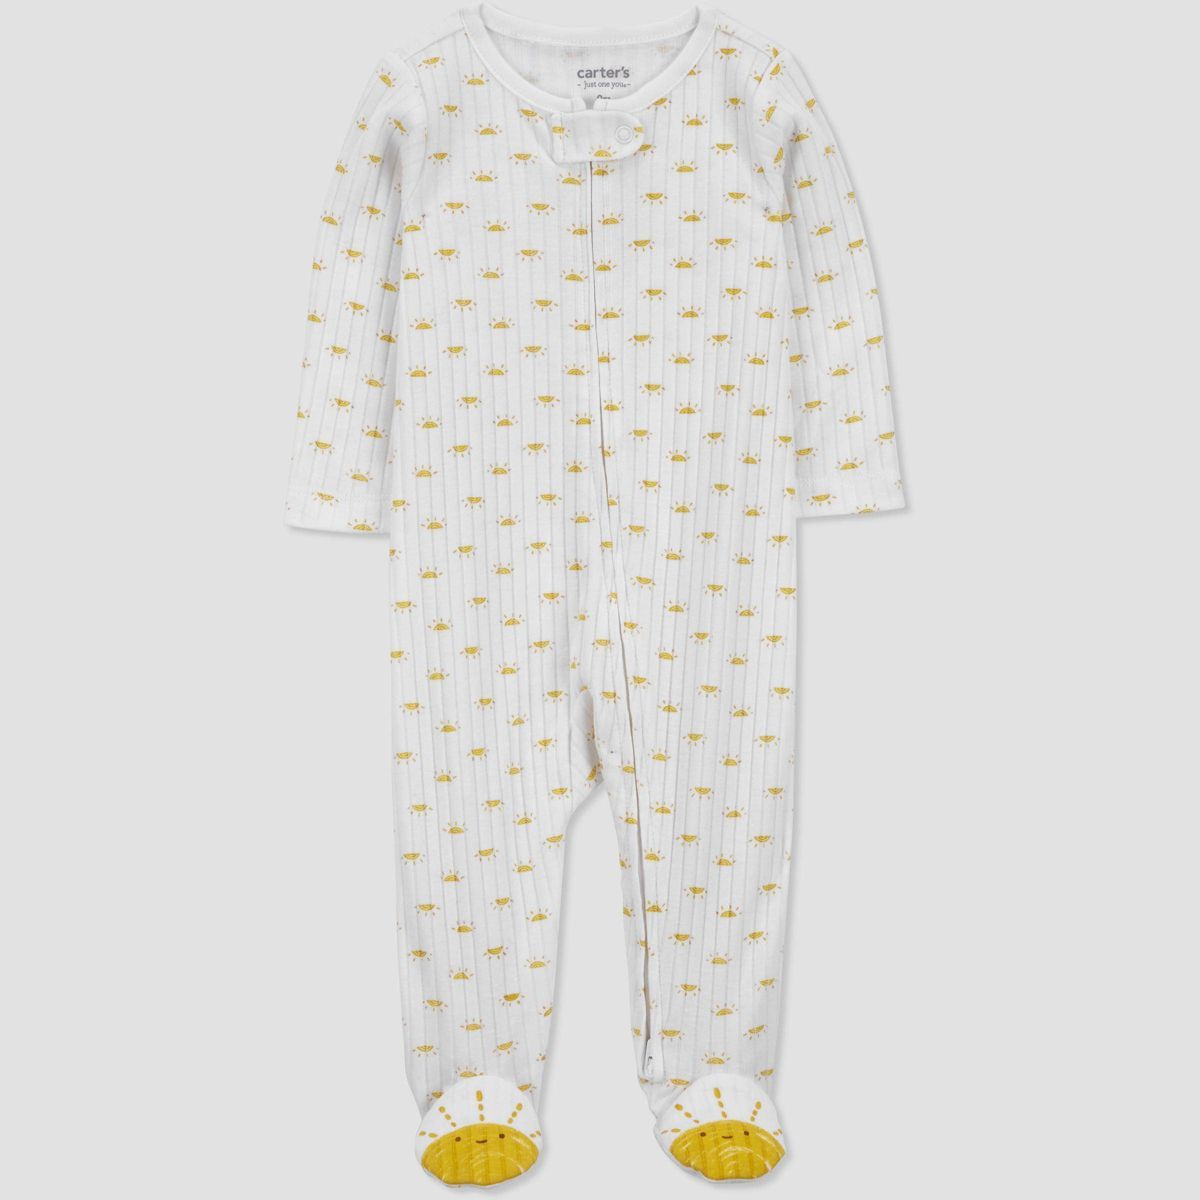 Carter's Just One You®️ Baby Sun Sleep N' Play - White/Gold | Target